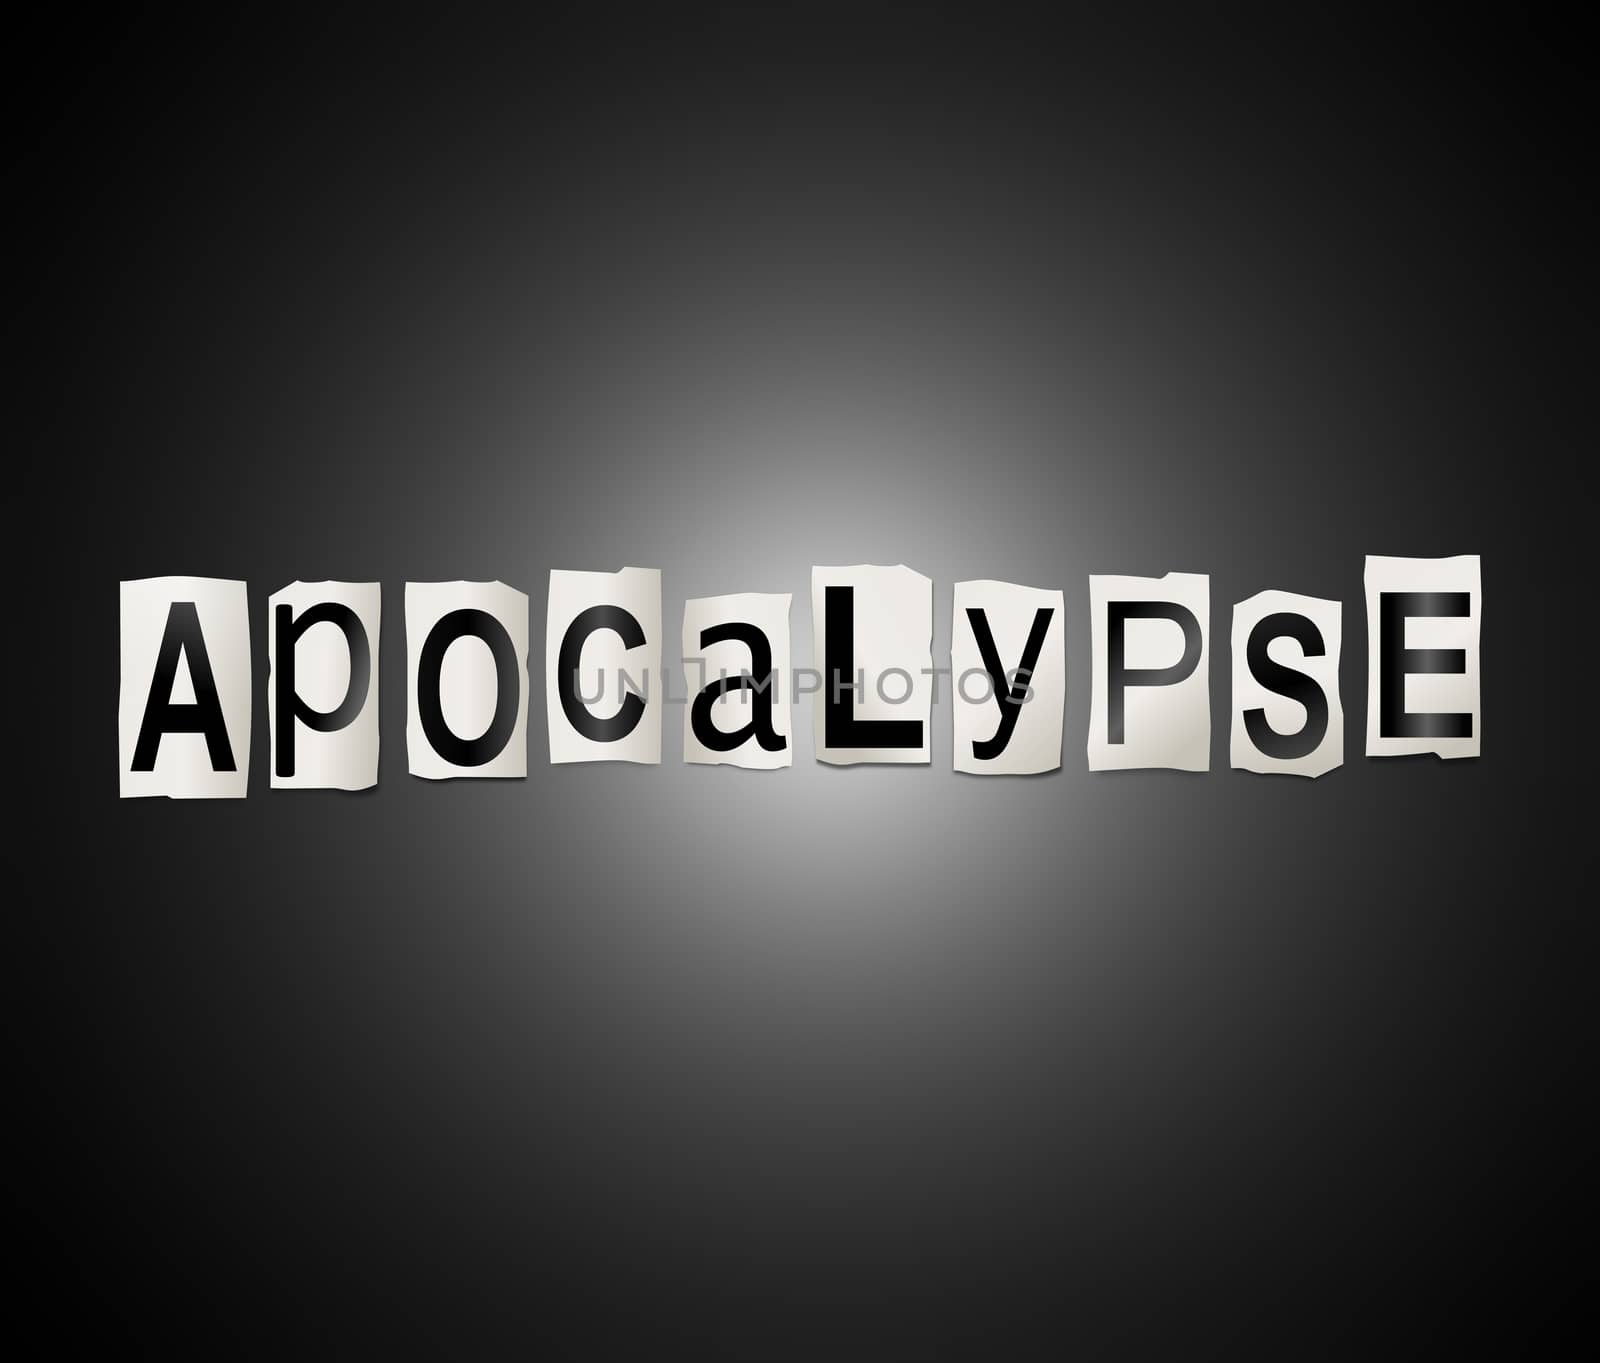 Illustration depicting a set of cut out printed letters arranged to form the word apocalypse.